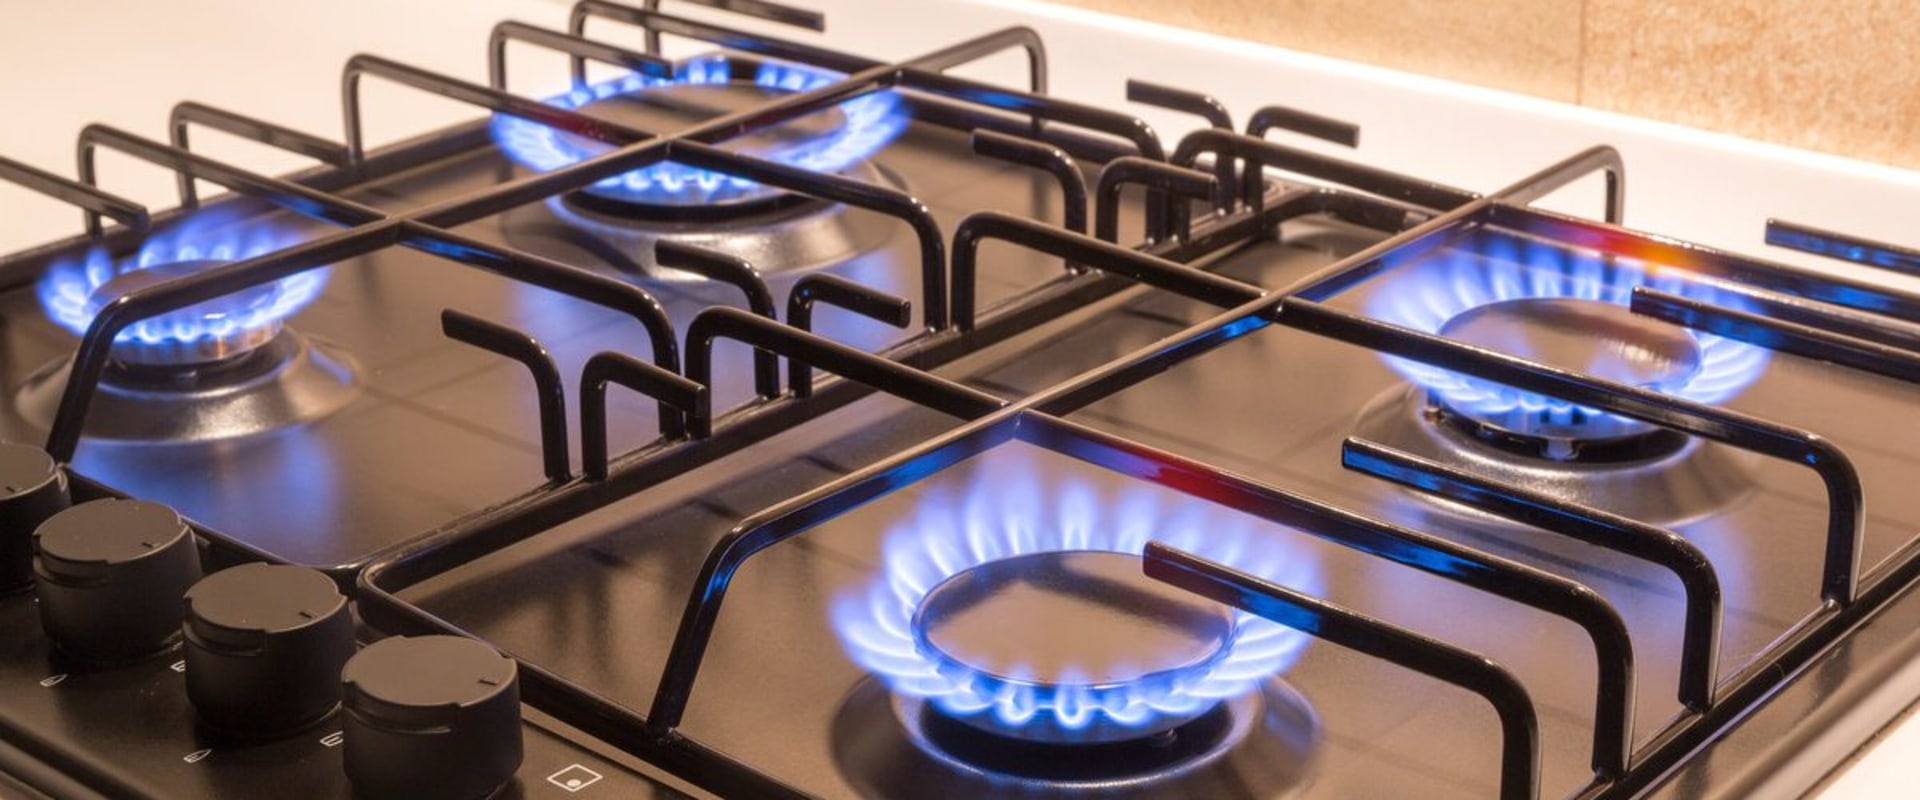 Are there any special considerations when repairing gas-powered appliances?